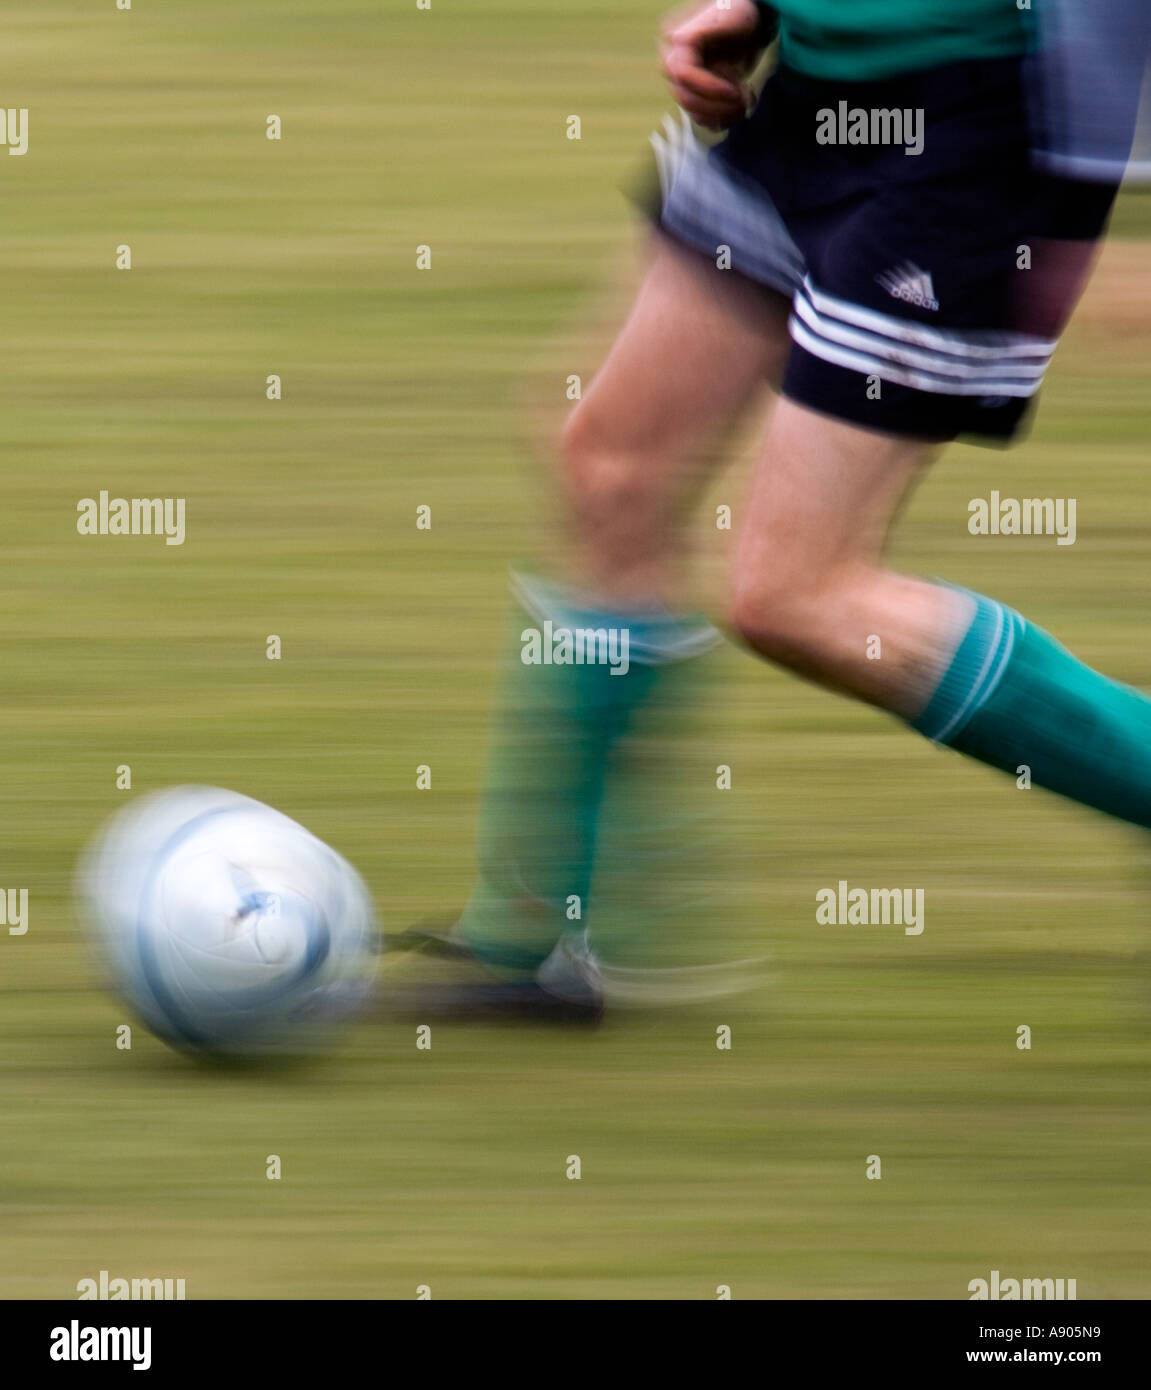 Football / Fußball, Typical Stock Photo